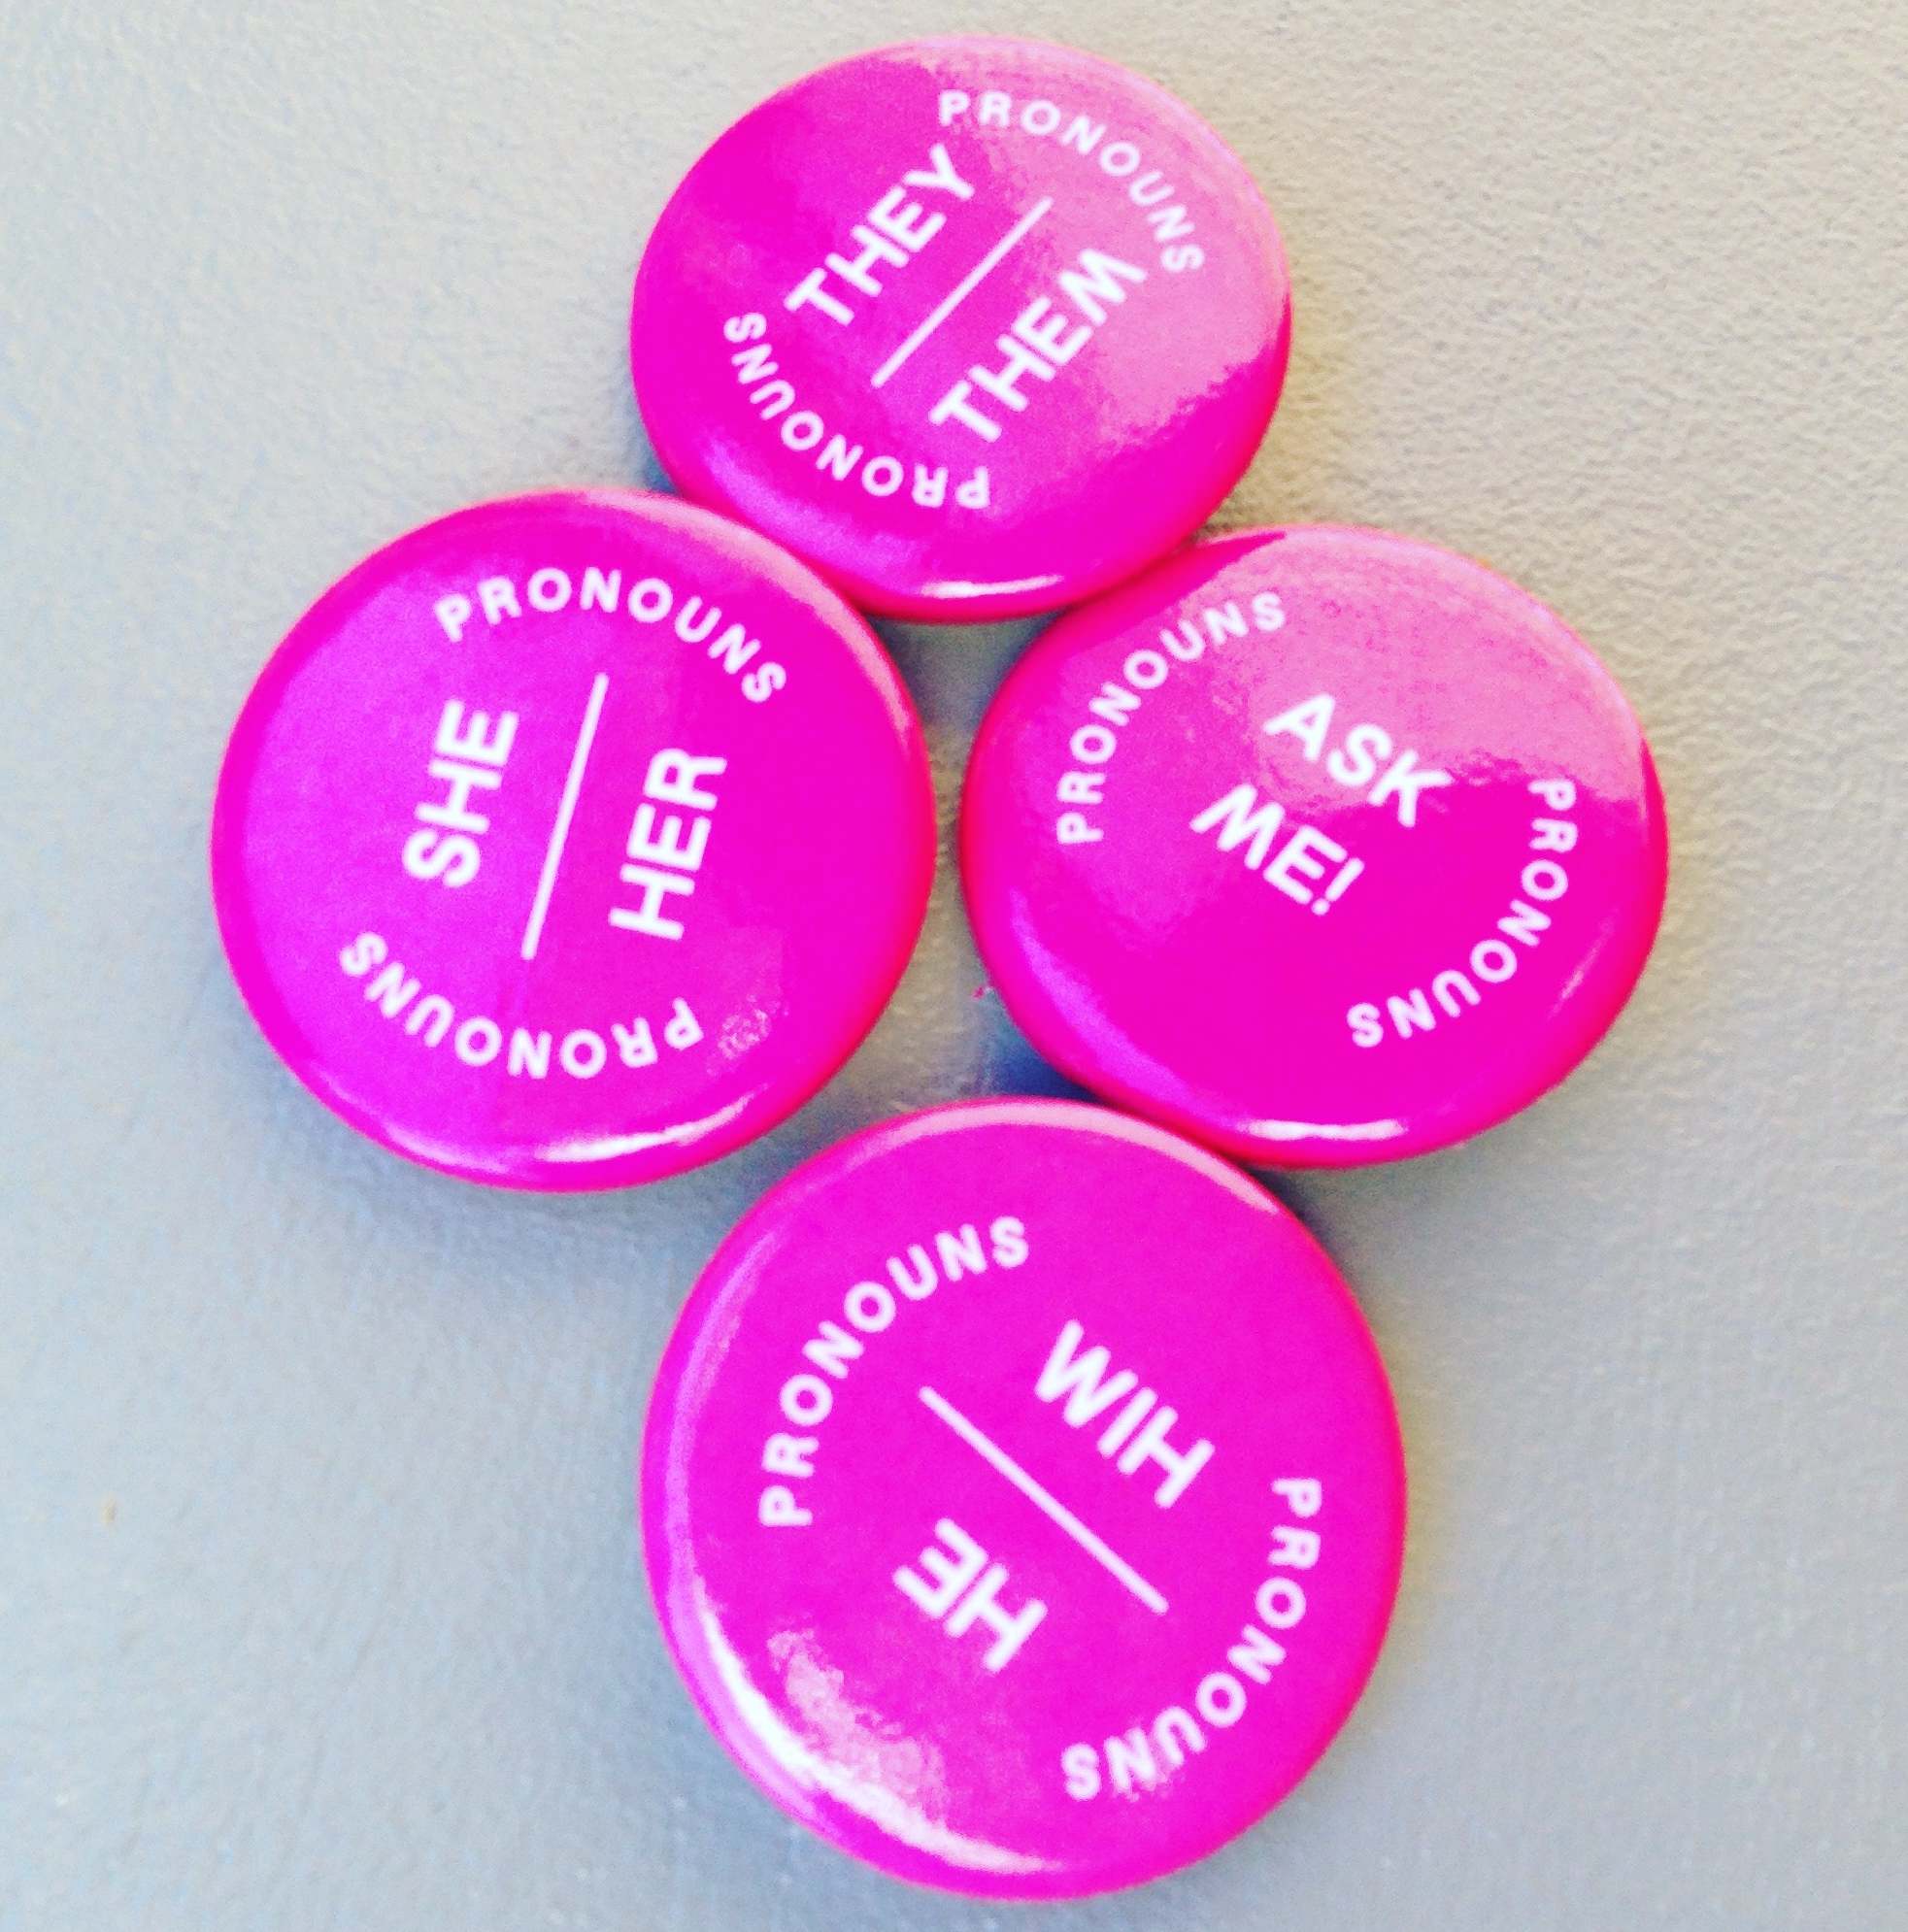 Four pronoun pins with the various pronouns on them and one that states Ask Me! about my pronouns.